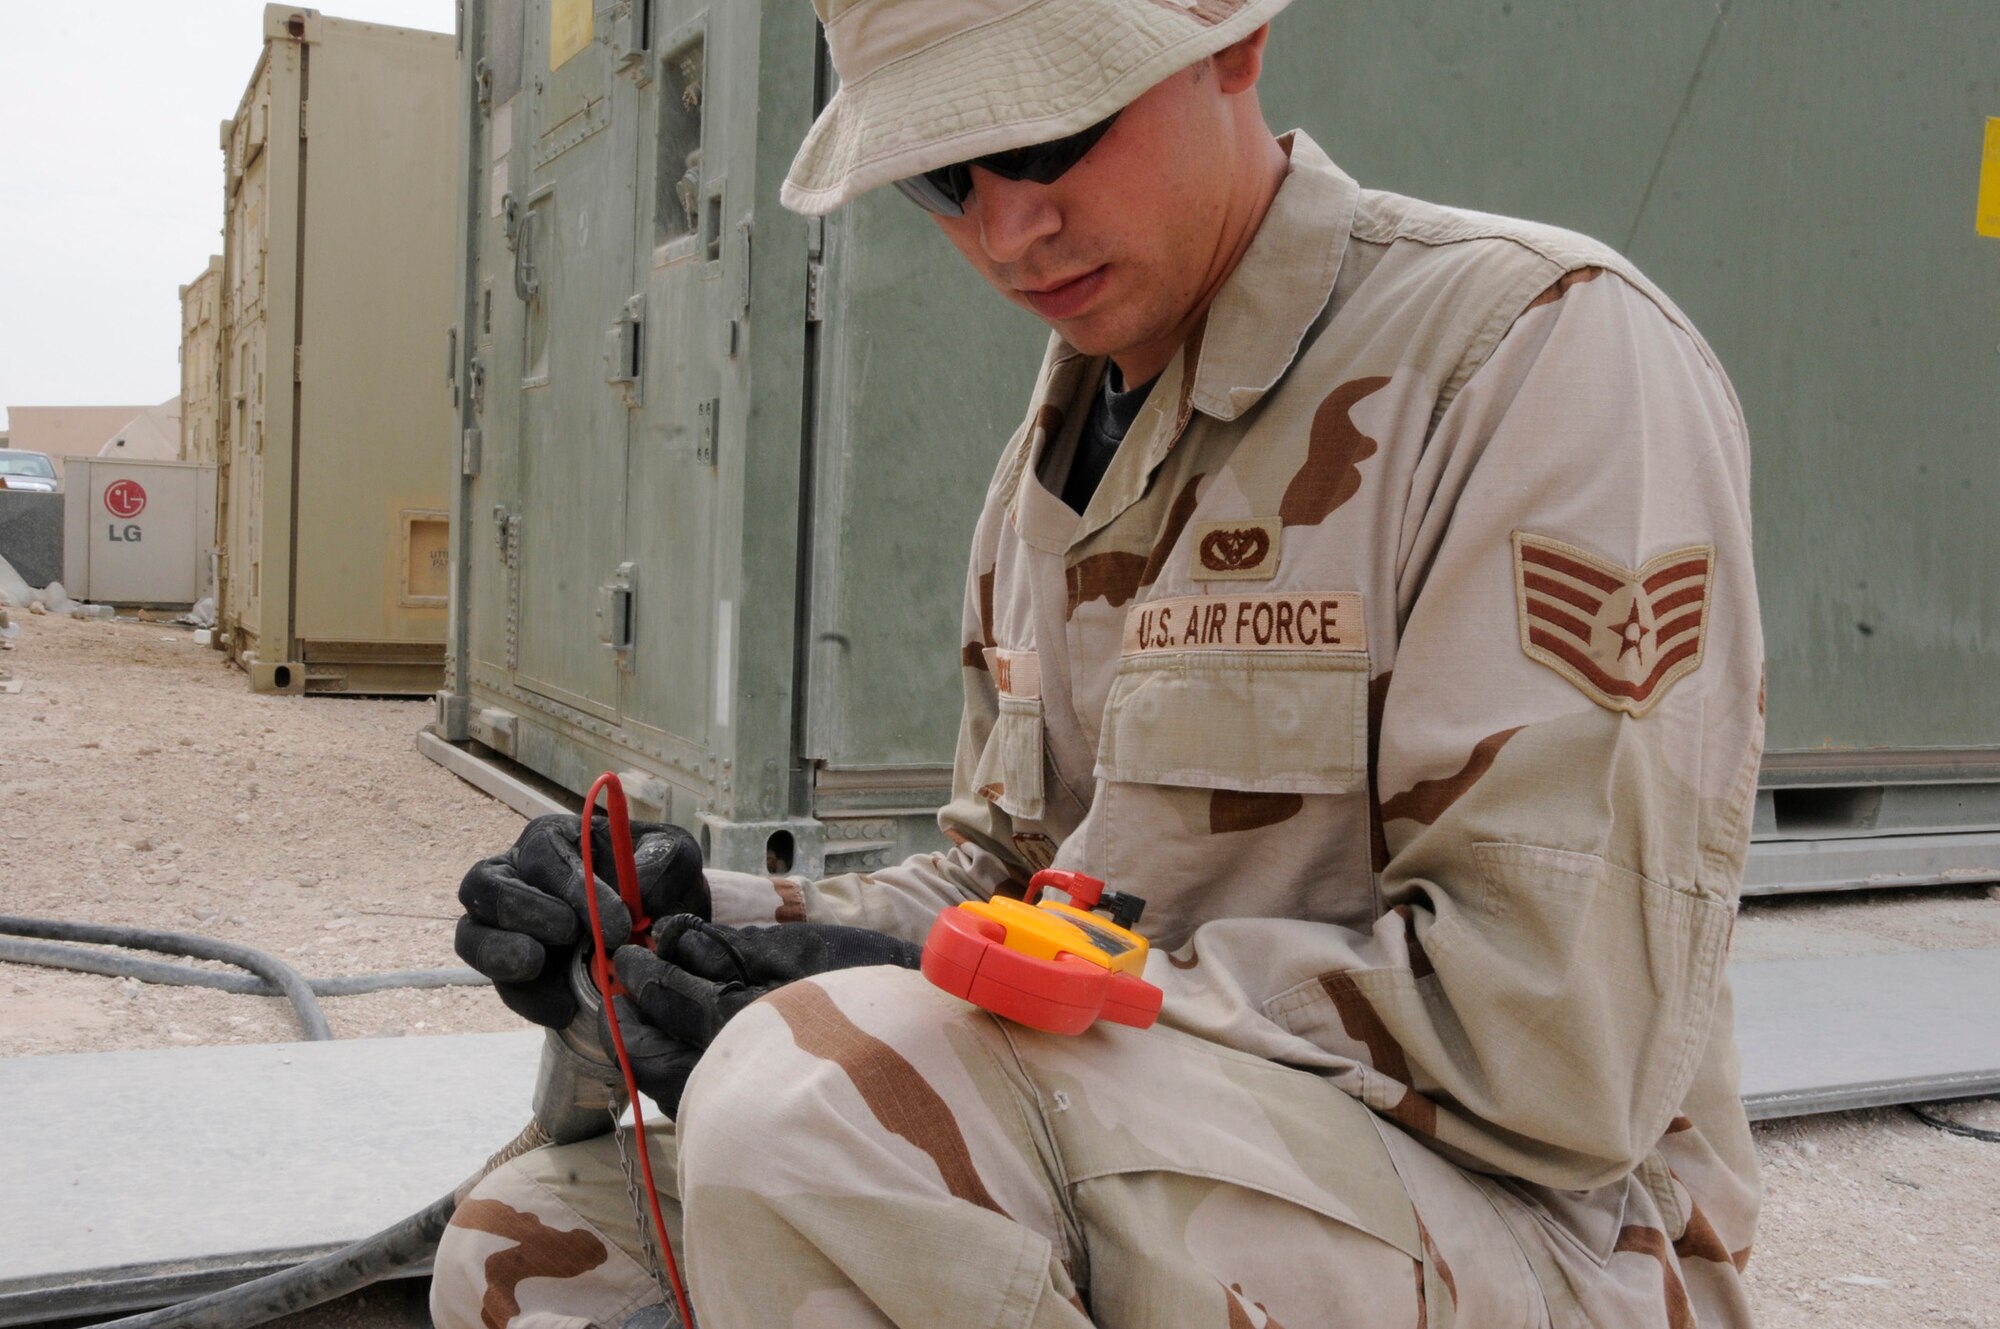 Staff Sgt. Matthew Sawicki, electrical systems journeyman assigned to the 379th Civil Engineer Squadron, checks for proper voltage on a recently installed 60 amp cable Nov. 3, at an undisclosed location in Southwest Asia.  The electric shop wired up a three-phase 60 amp breaker and ran a cable through the back of the building to supply power to a reefer unit.  Sergeant Sawicki is a native of Modesto Calif., and deployed from Travis Air Force Base, Calif.  (U.S. Air Force photo by Tech. Sgt. Michael Boquette)